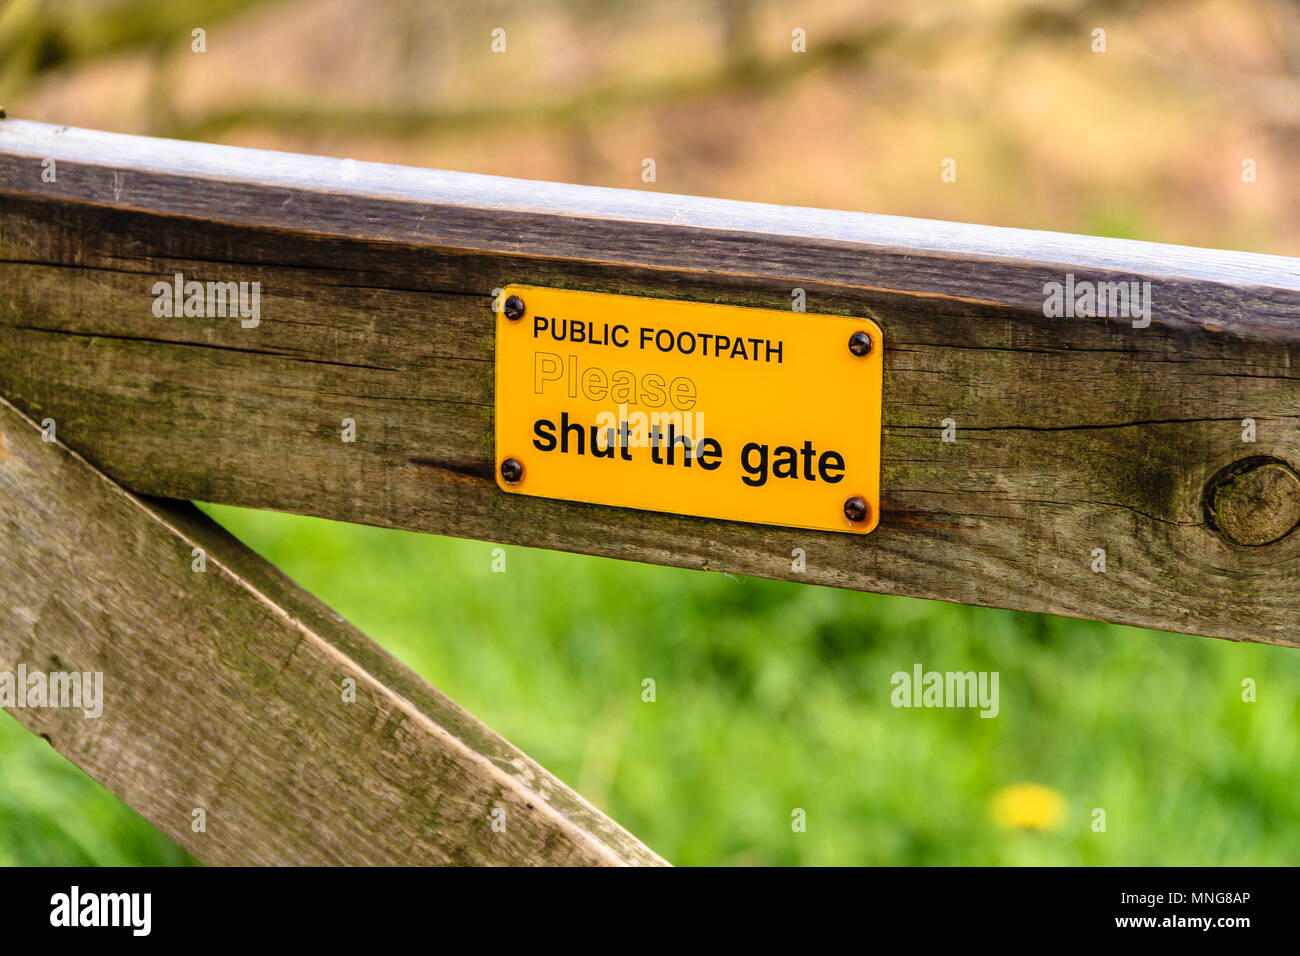 Public Footpath Please Shut The Gate sign, on a wooden gate. May 2018. Stock Photo